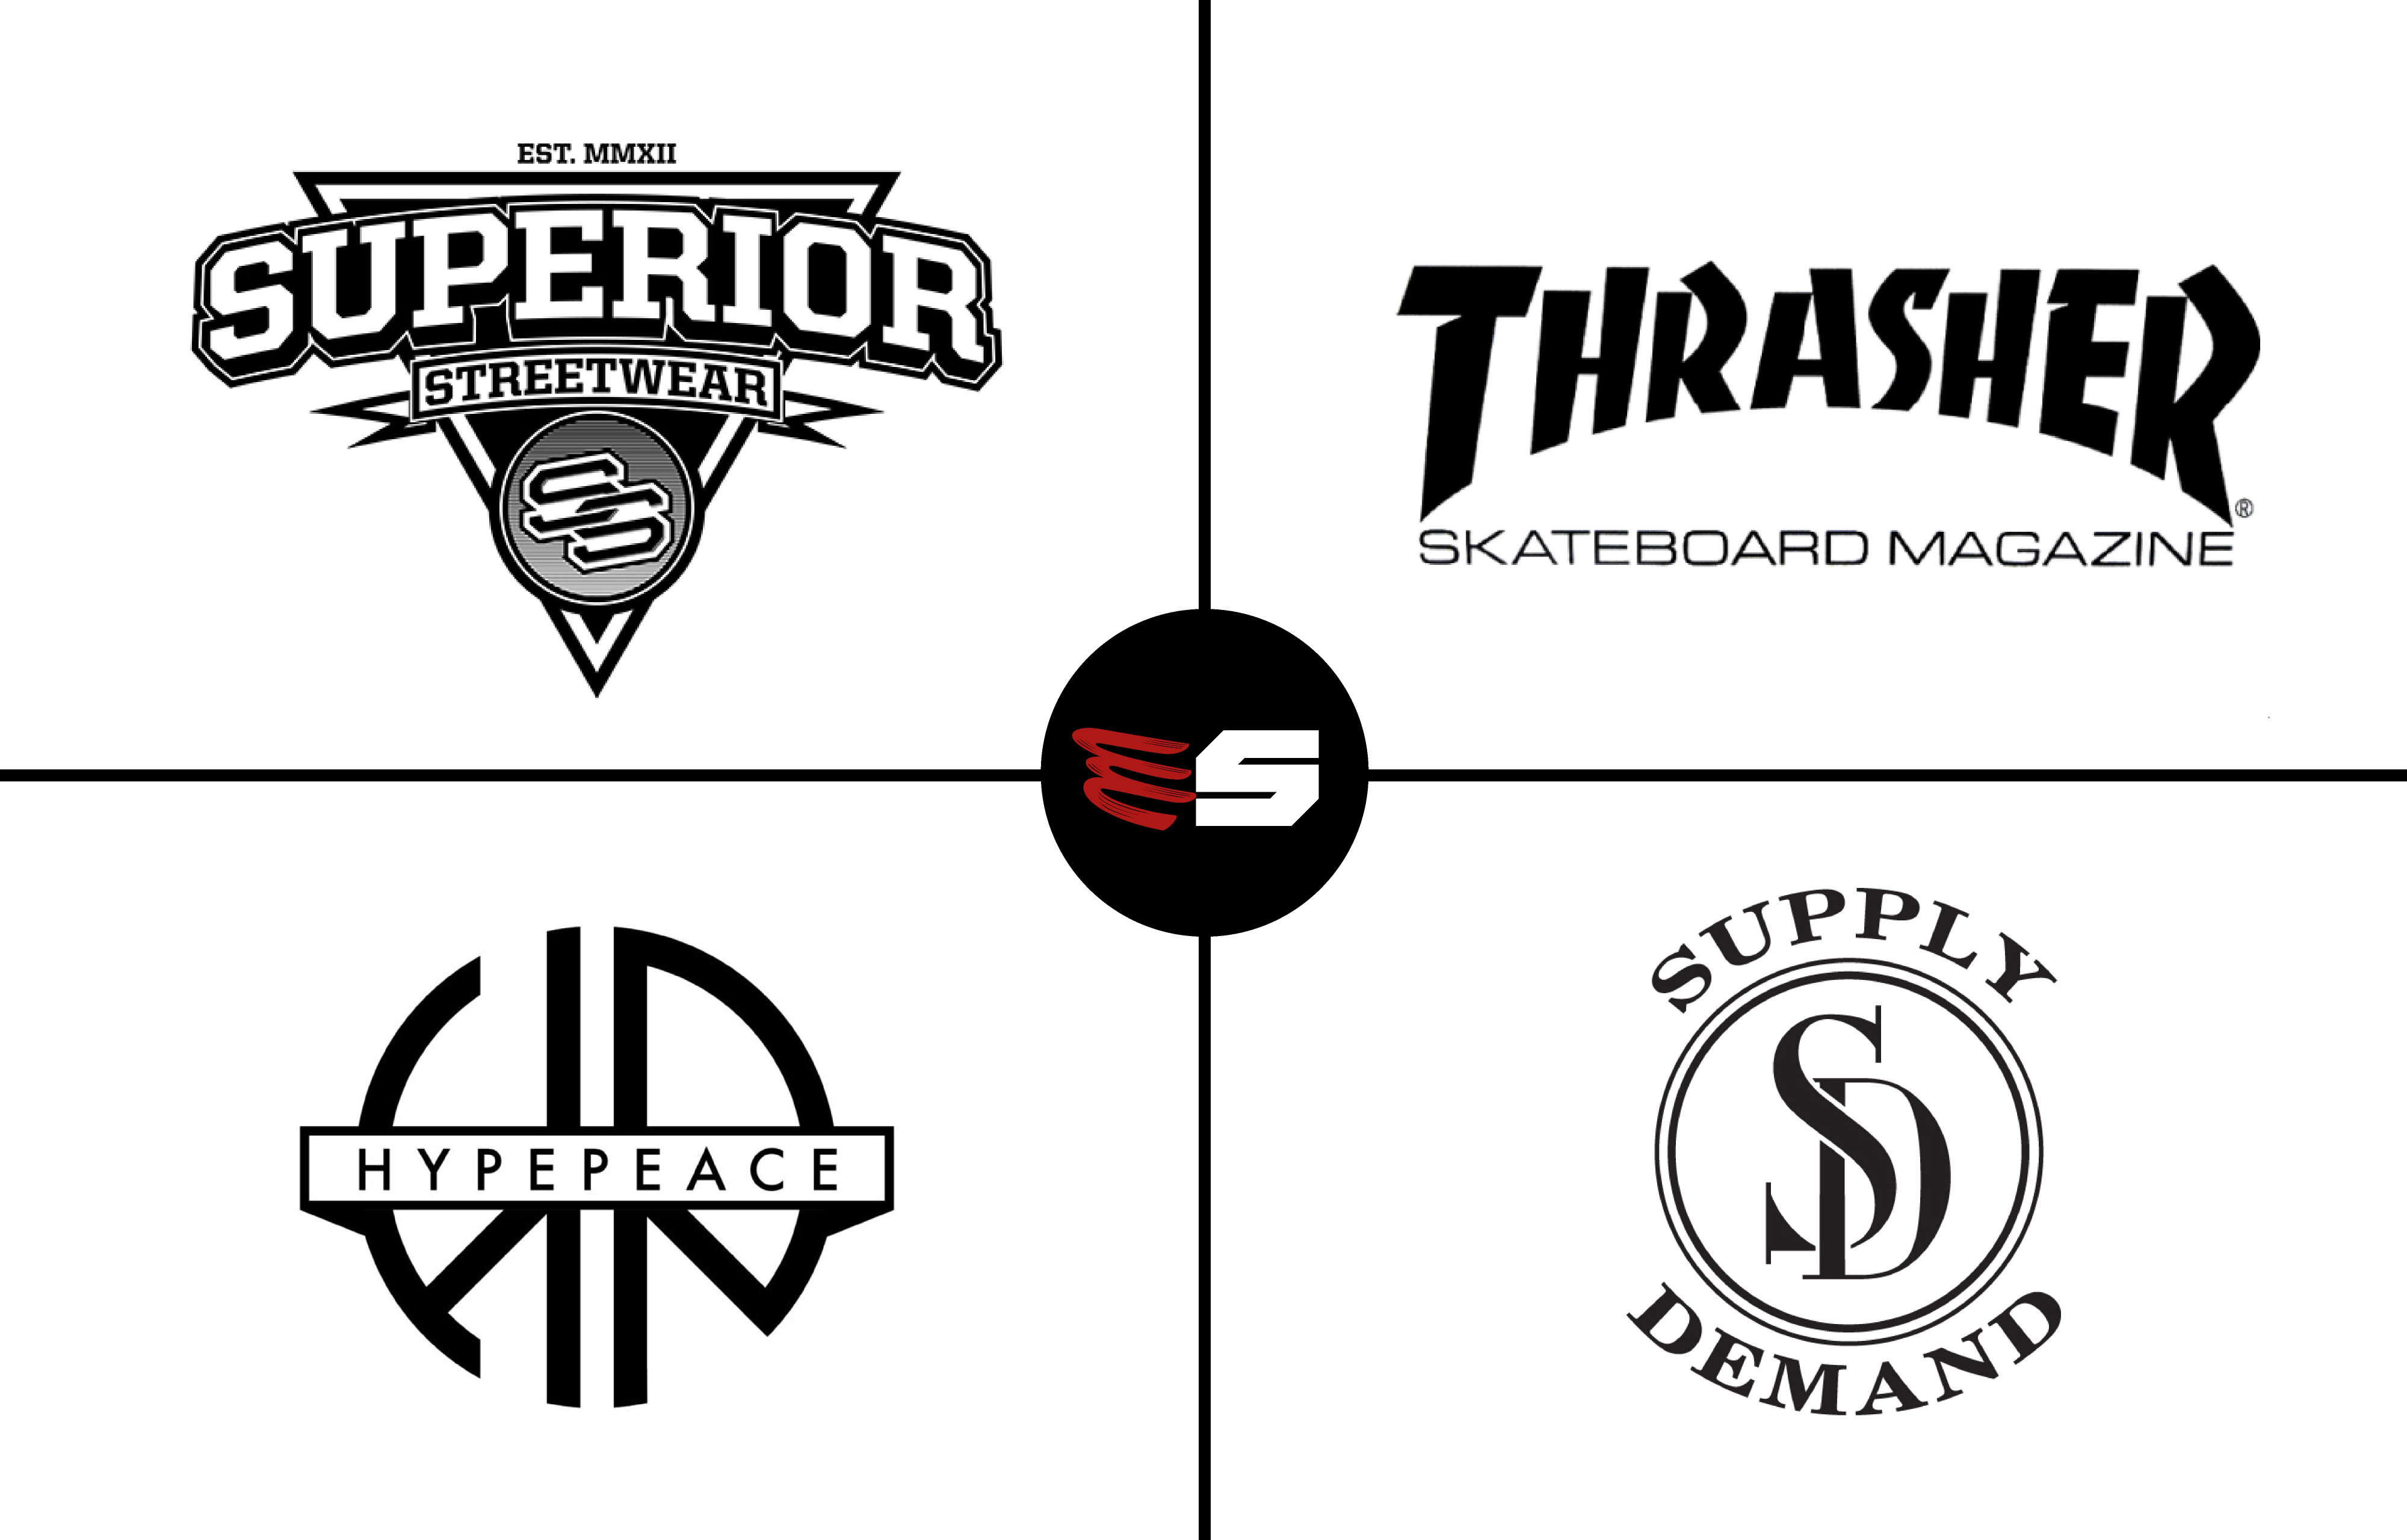 OpenDream - create a minimalist streetwear logo for a clothing brand based  on skateboard